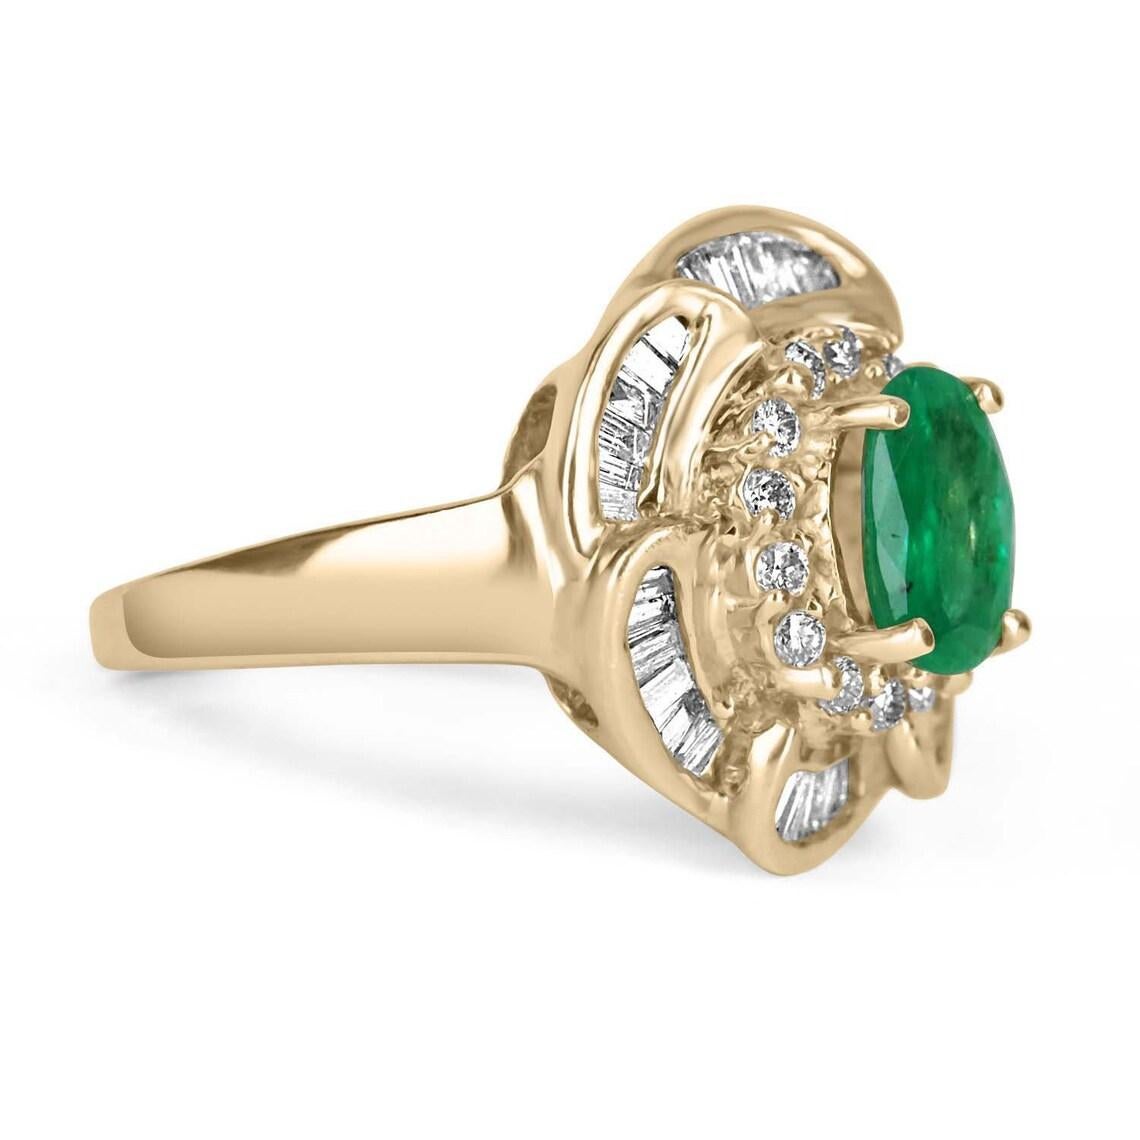 Displayed is a floral emerald & diamond ring. The center gemstone is an oval emerald with very good eye clarity and color. Accenting the gorgeous emerald are baguette-shaped diamonds in a petal design. Brilliant round diamonds halo around the